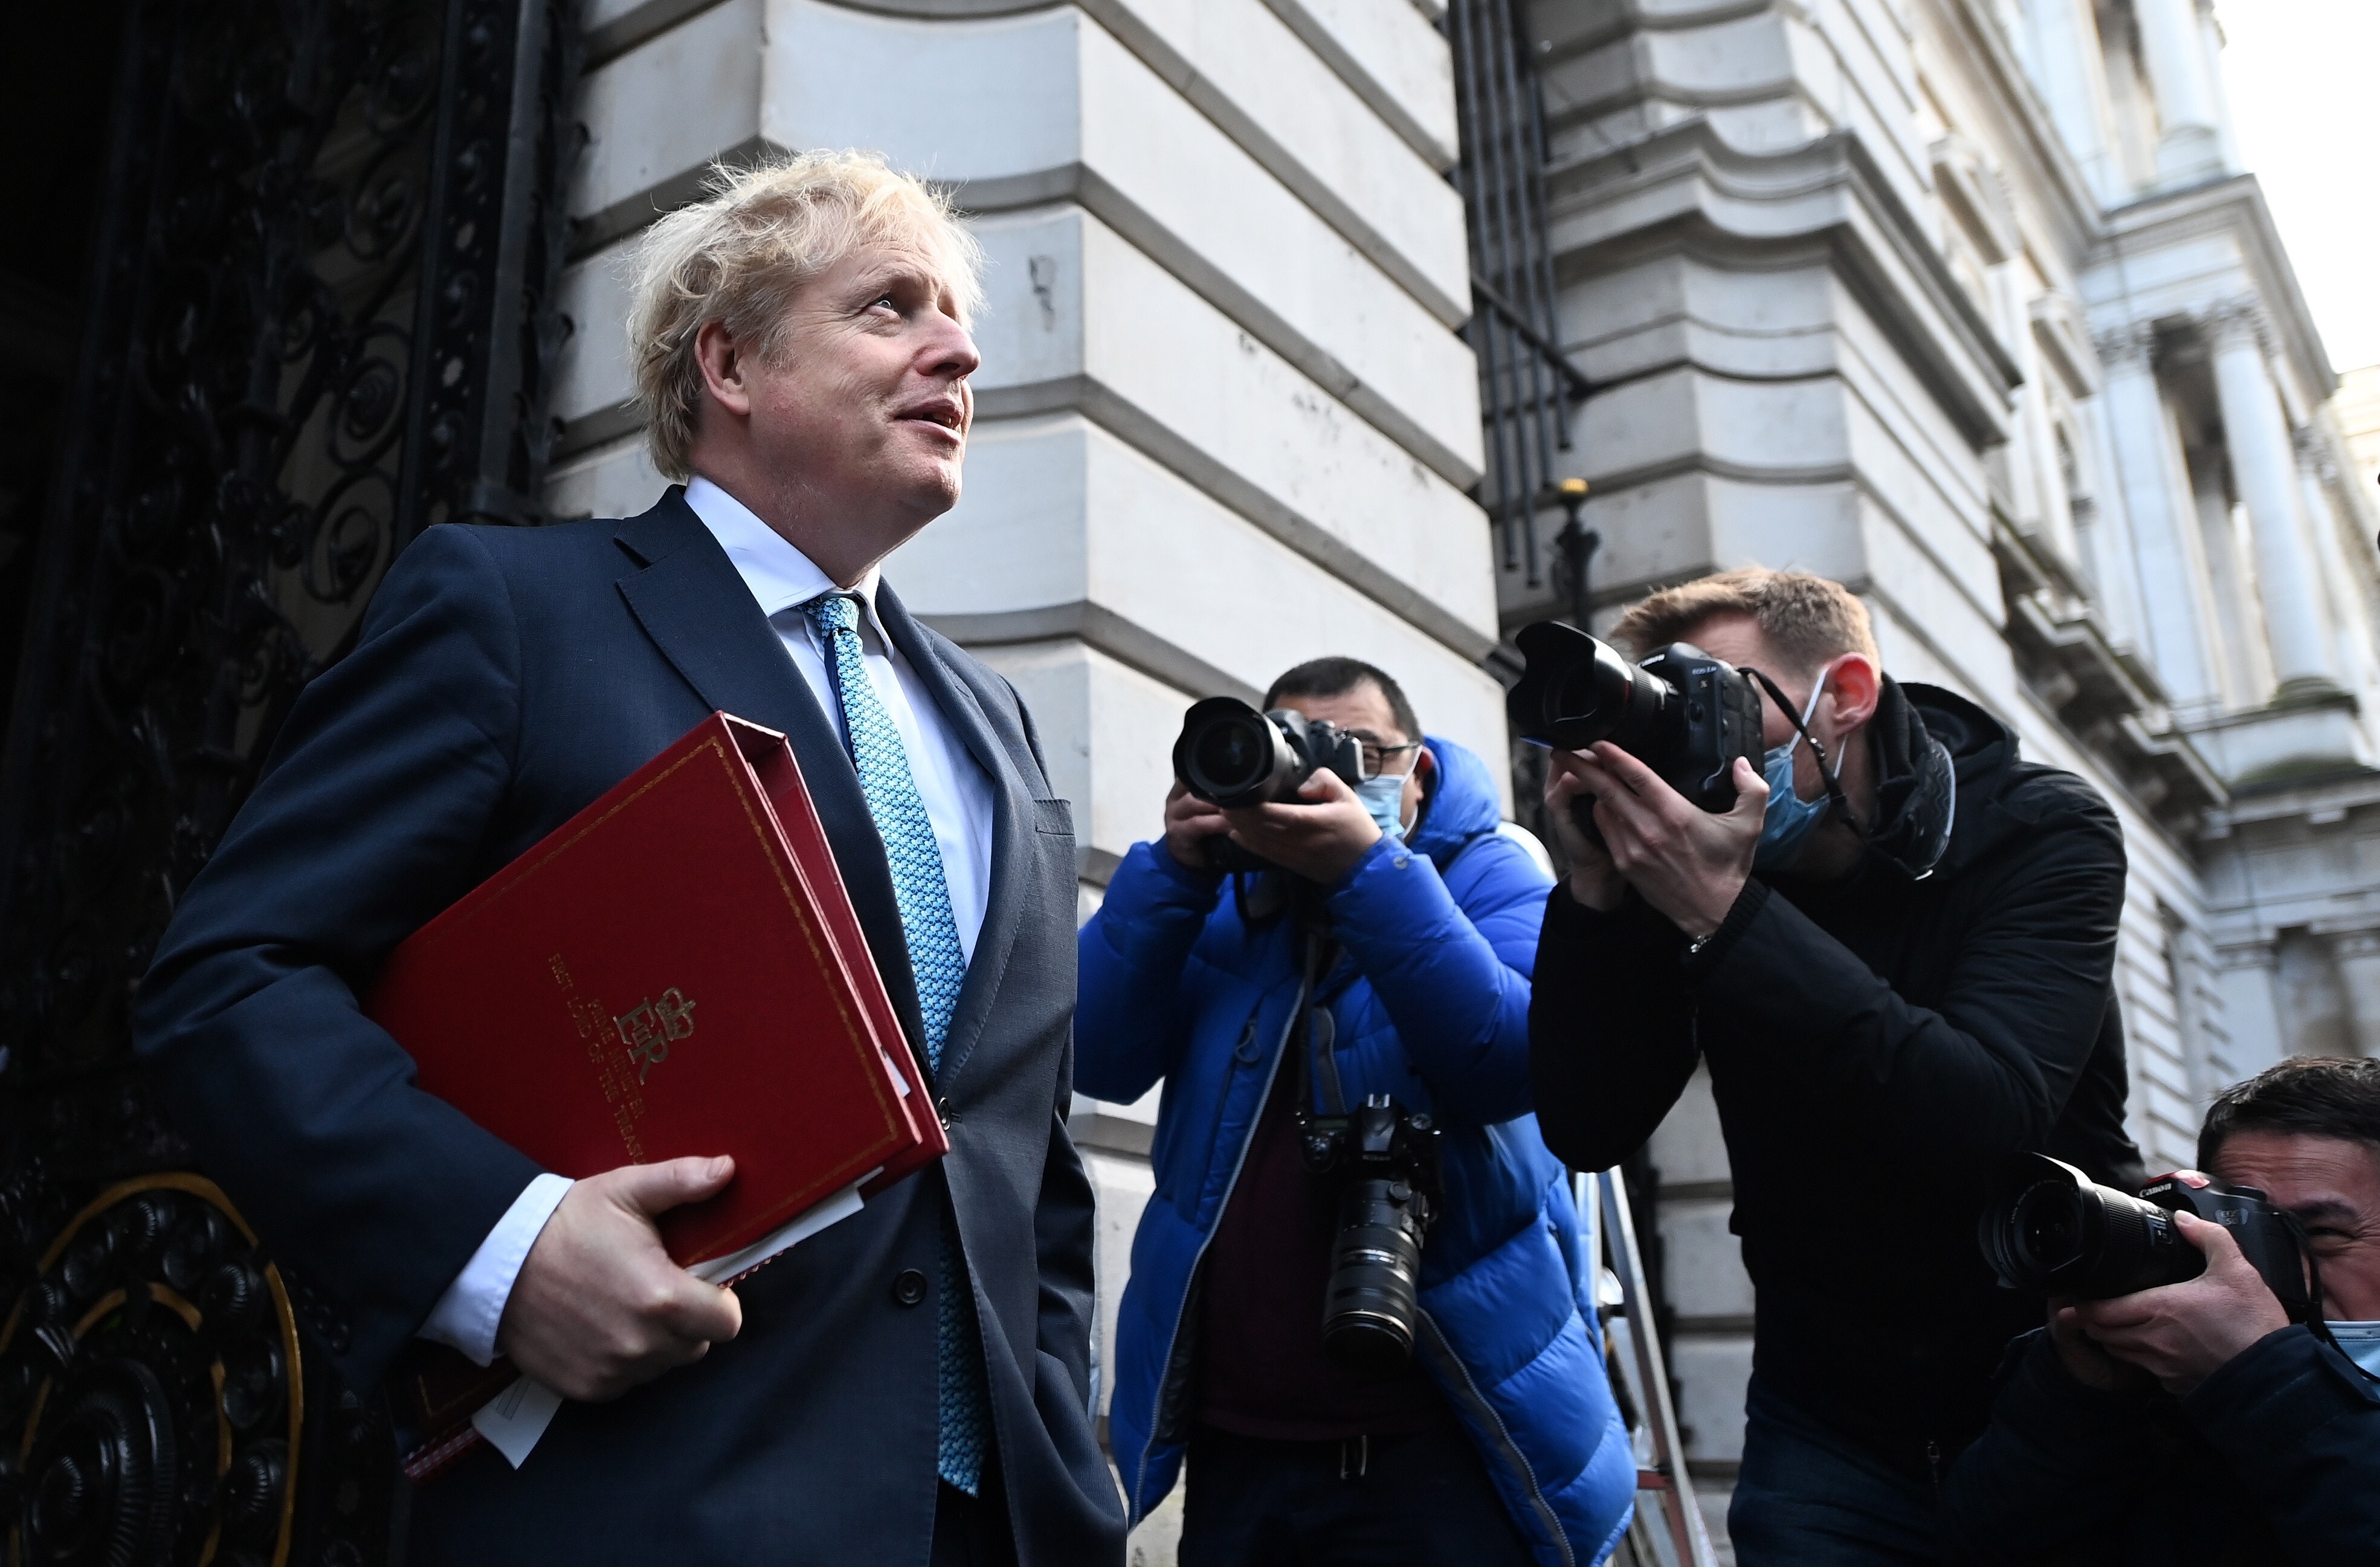 British Prime Minister Boris Johnson, shown leaving 10 Downing Street on Tuesday, has invited India, South Korea and Australia to take part in the G7 summit meeting next year. Photo: EPA-EFE